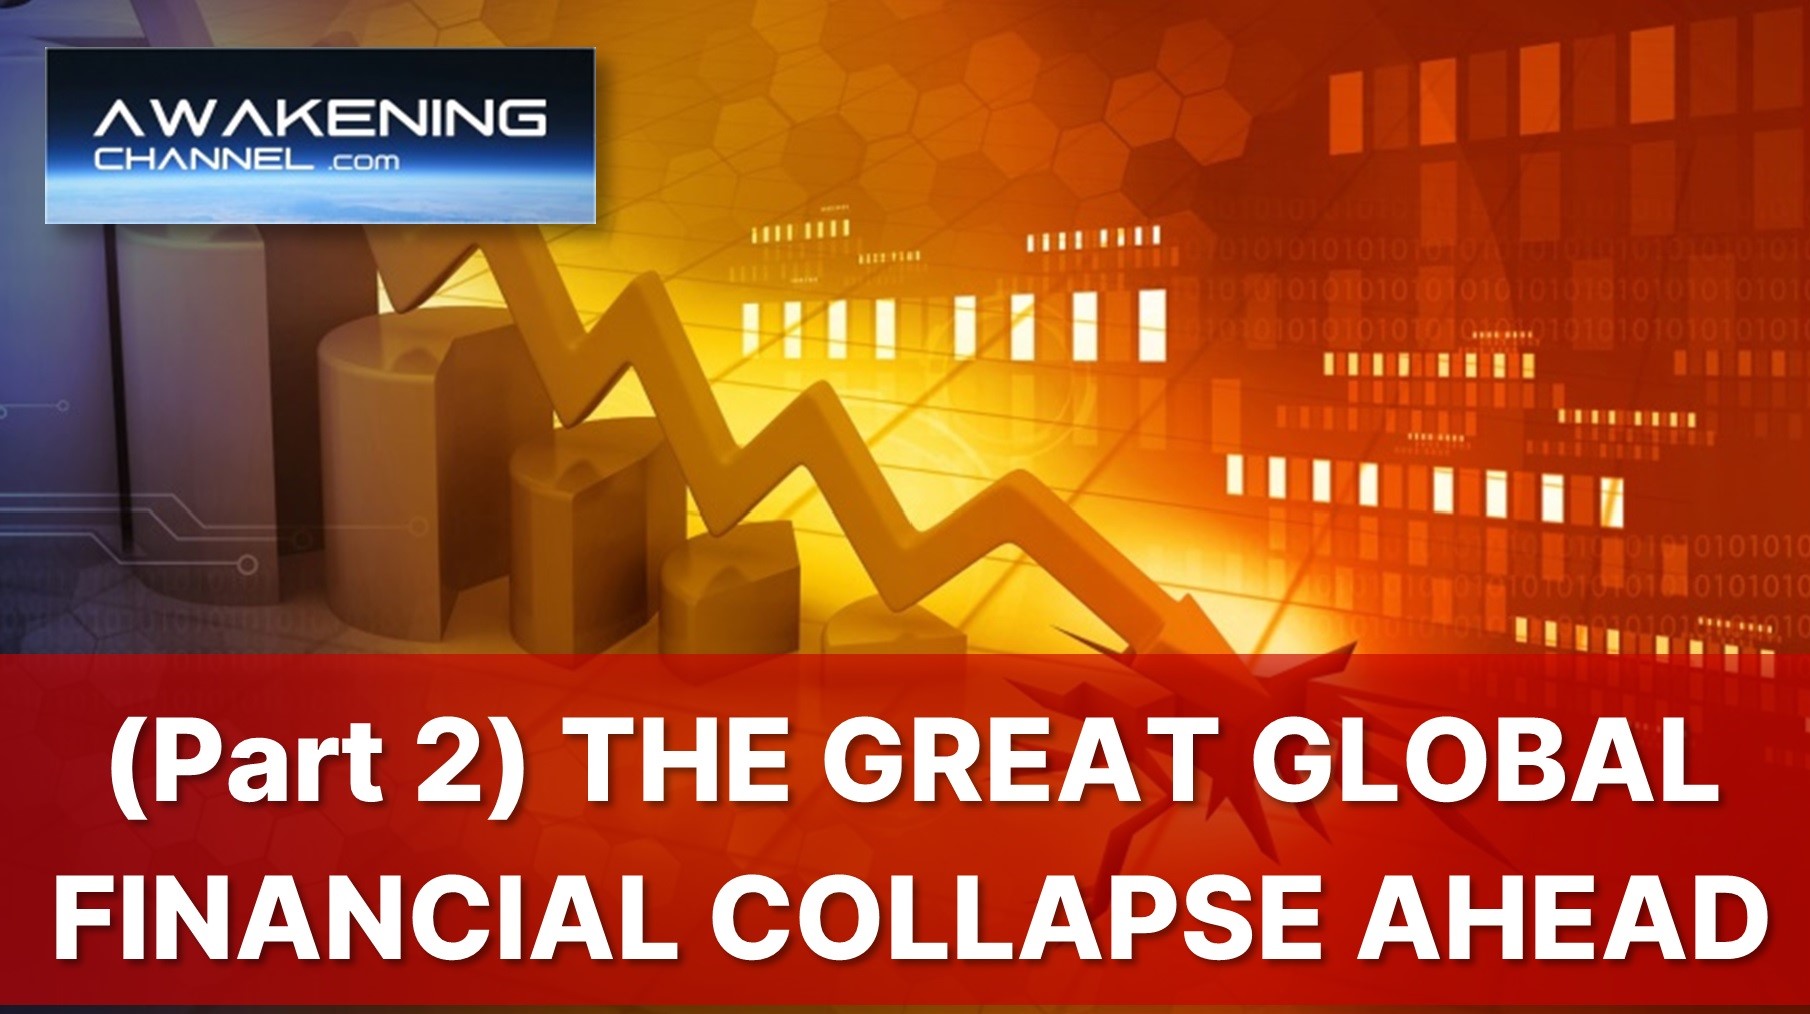 (Part 2) THE GREAT GLOBAL FINANCIAL COLLAPSE AHEAD